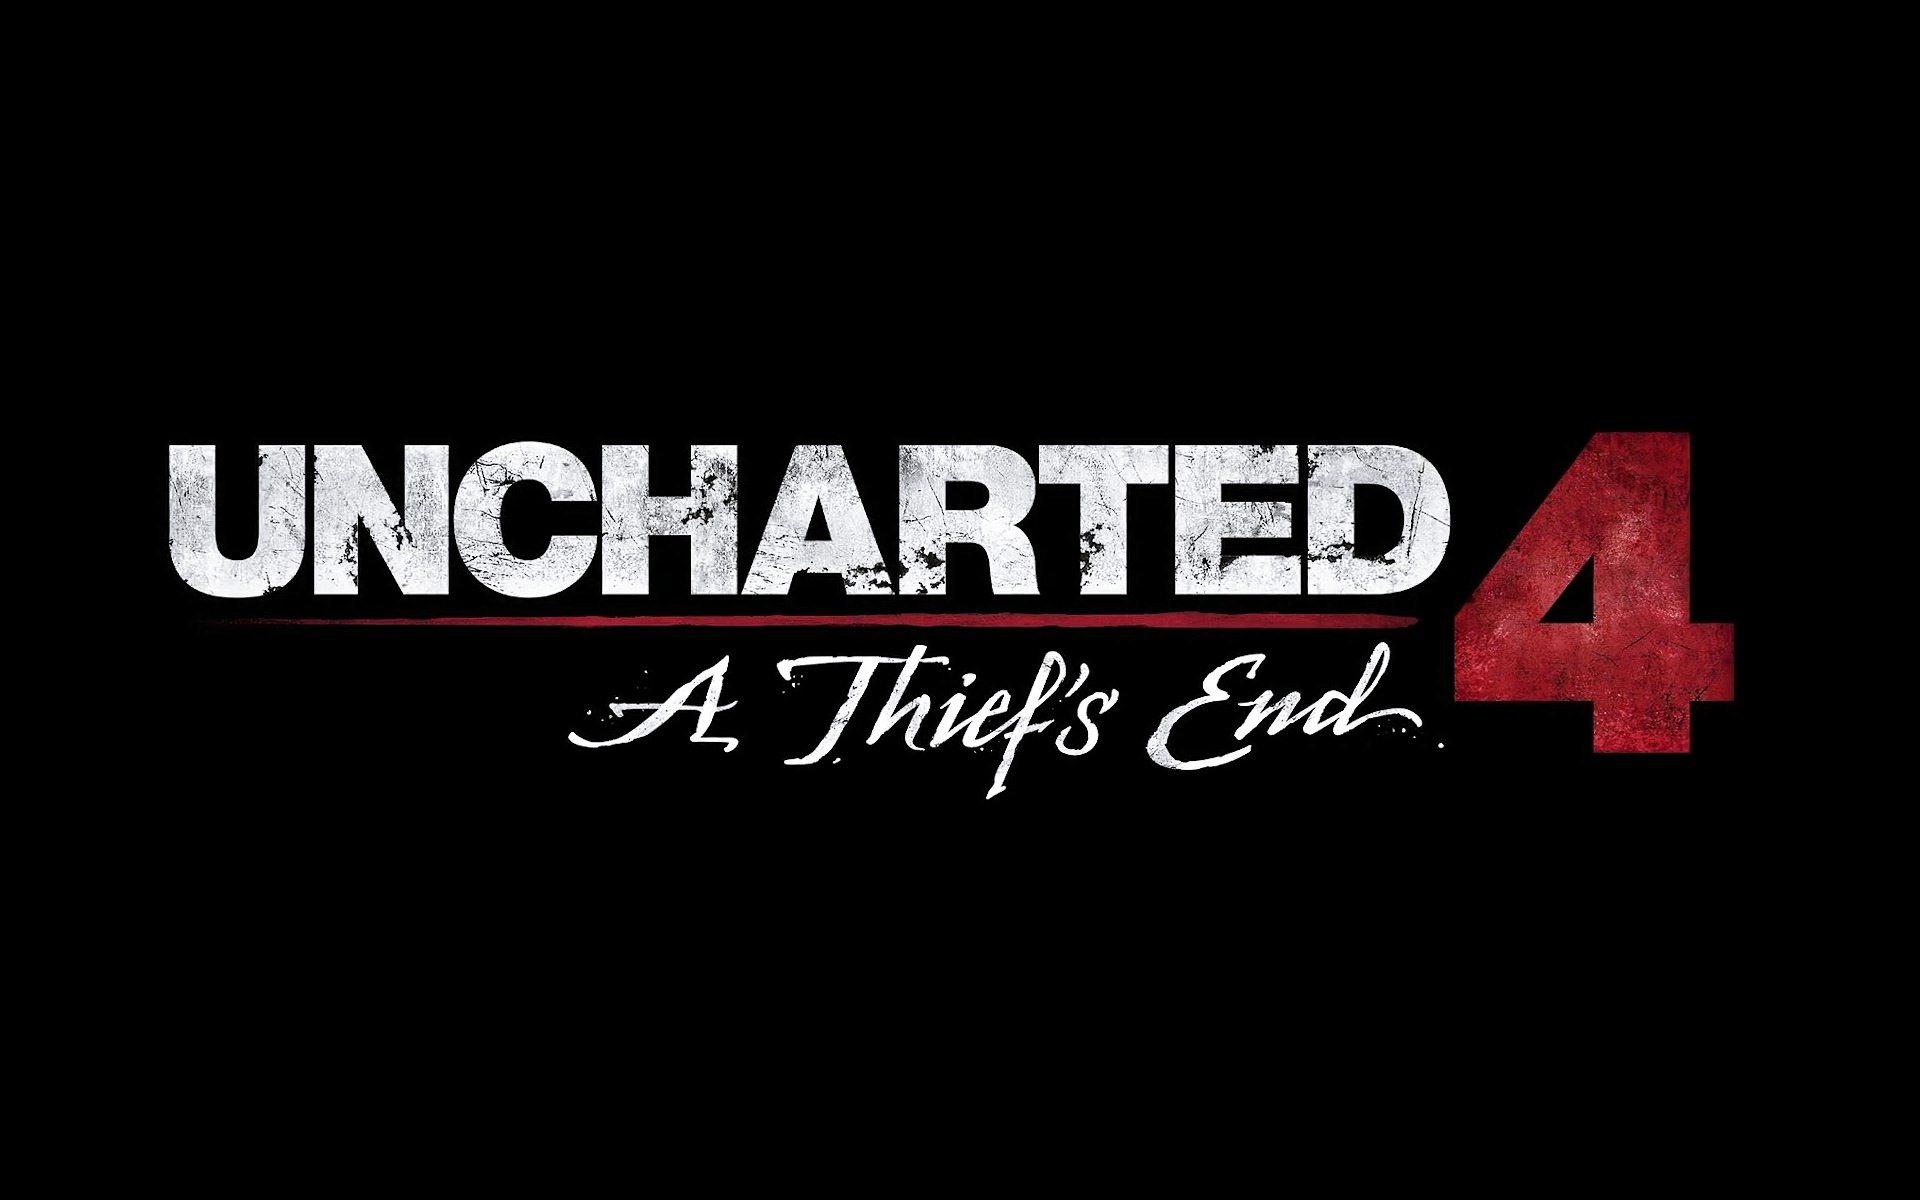 Uncharted Logo - Uncharted 4: A Thief's End - Save Game